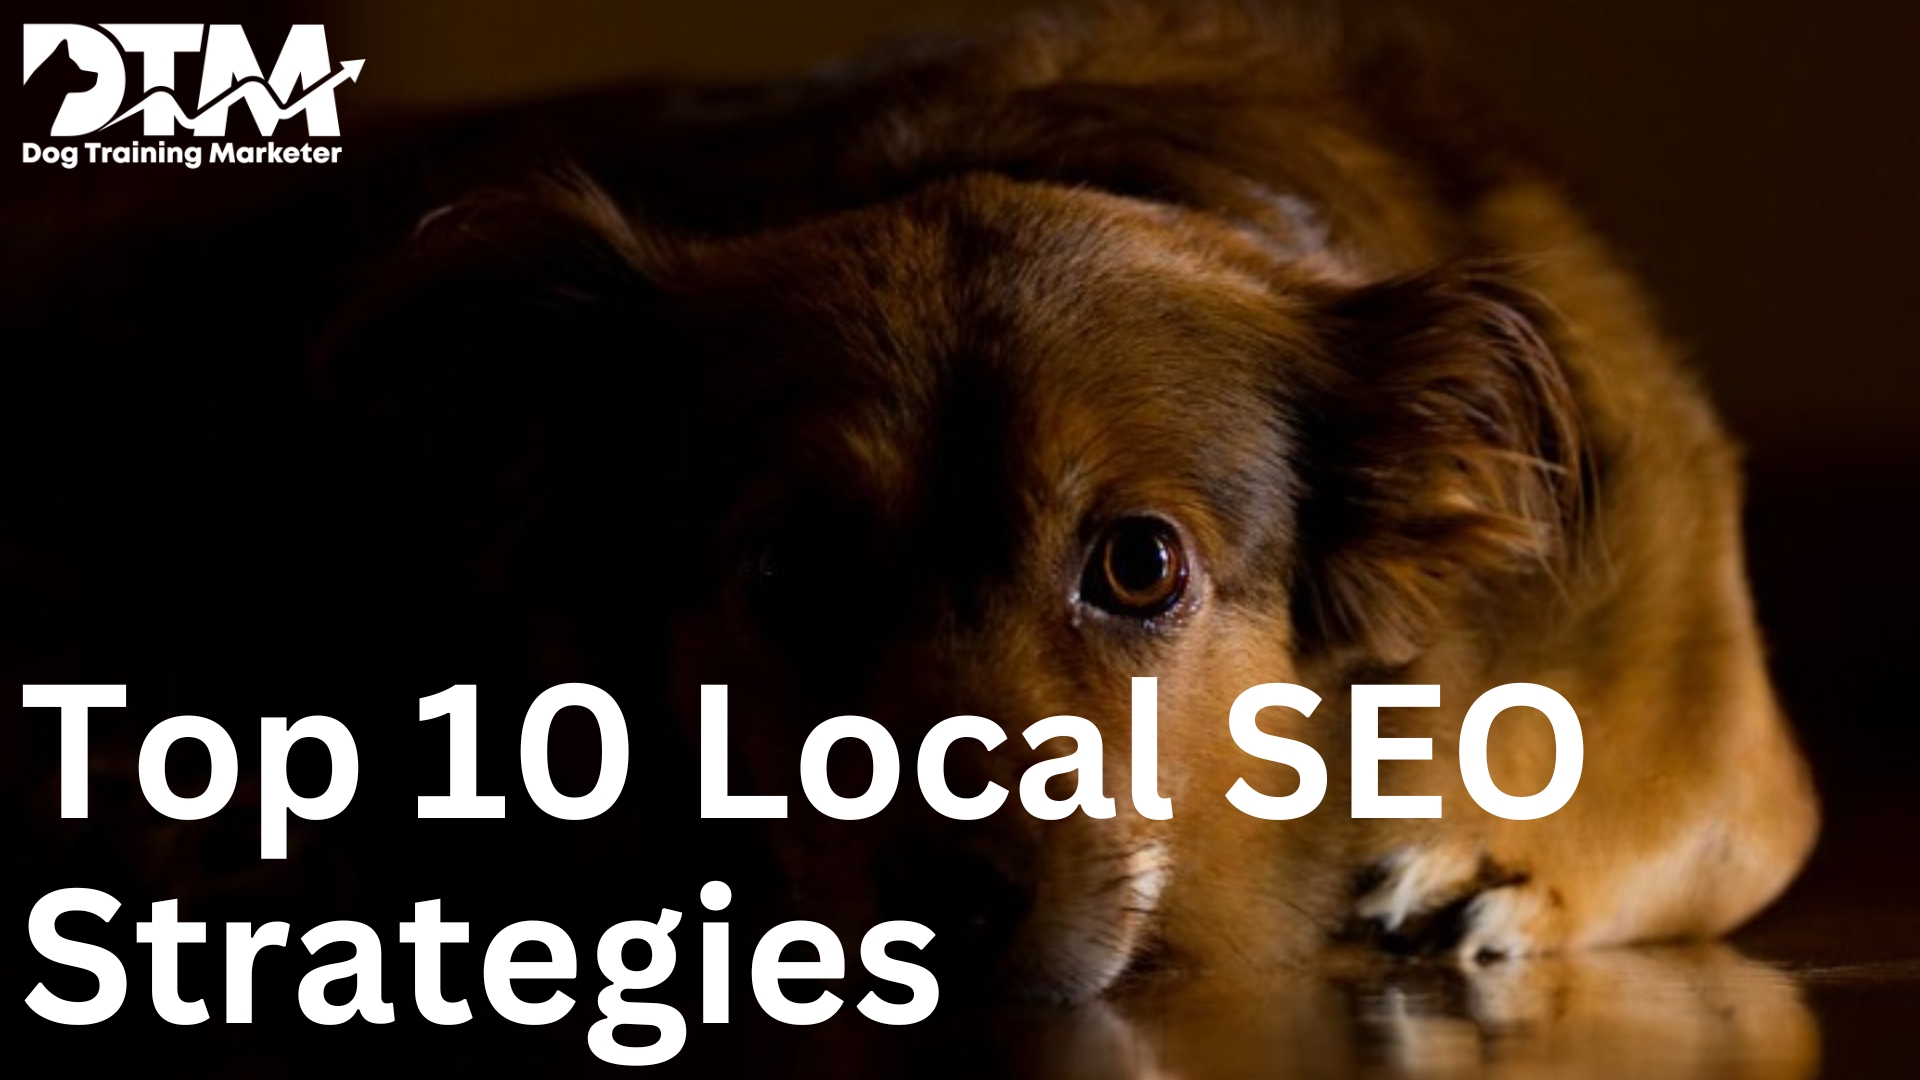 10 local seo strategies for dog training business